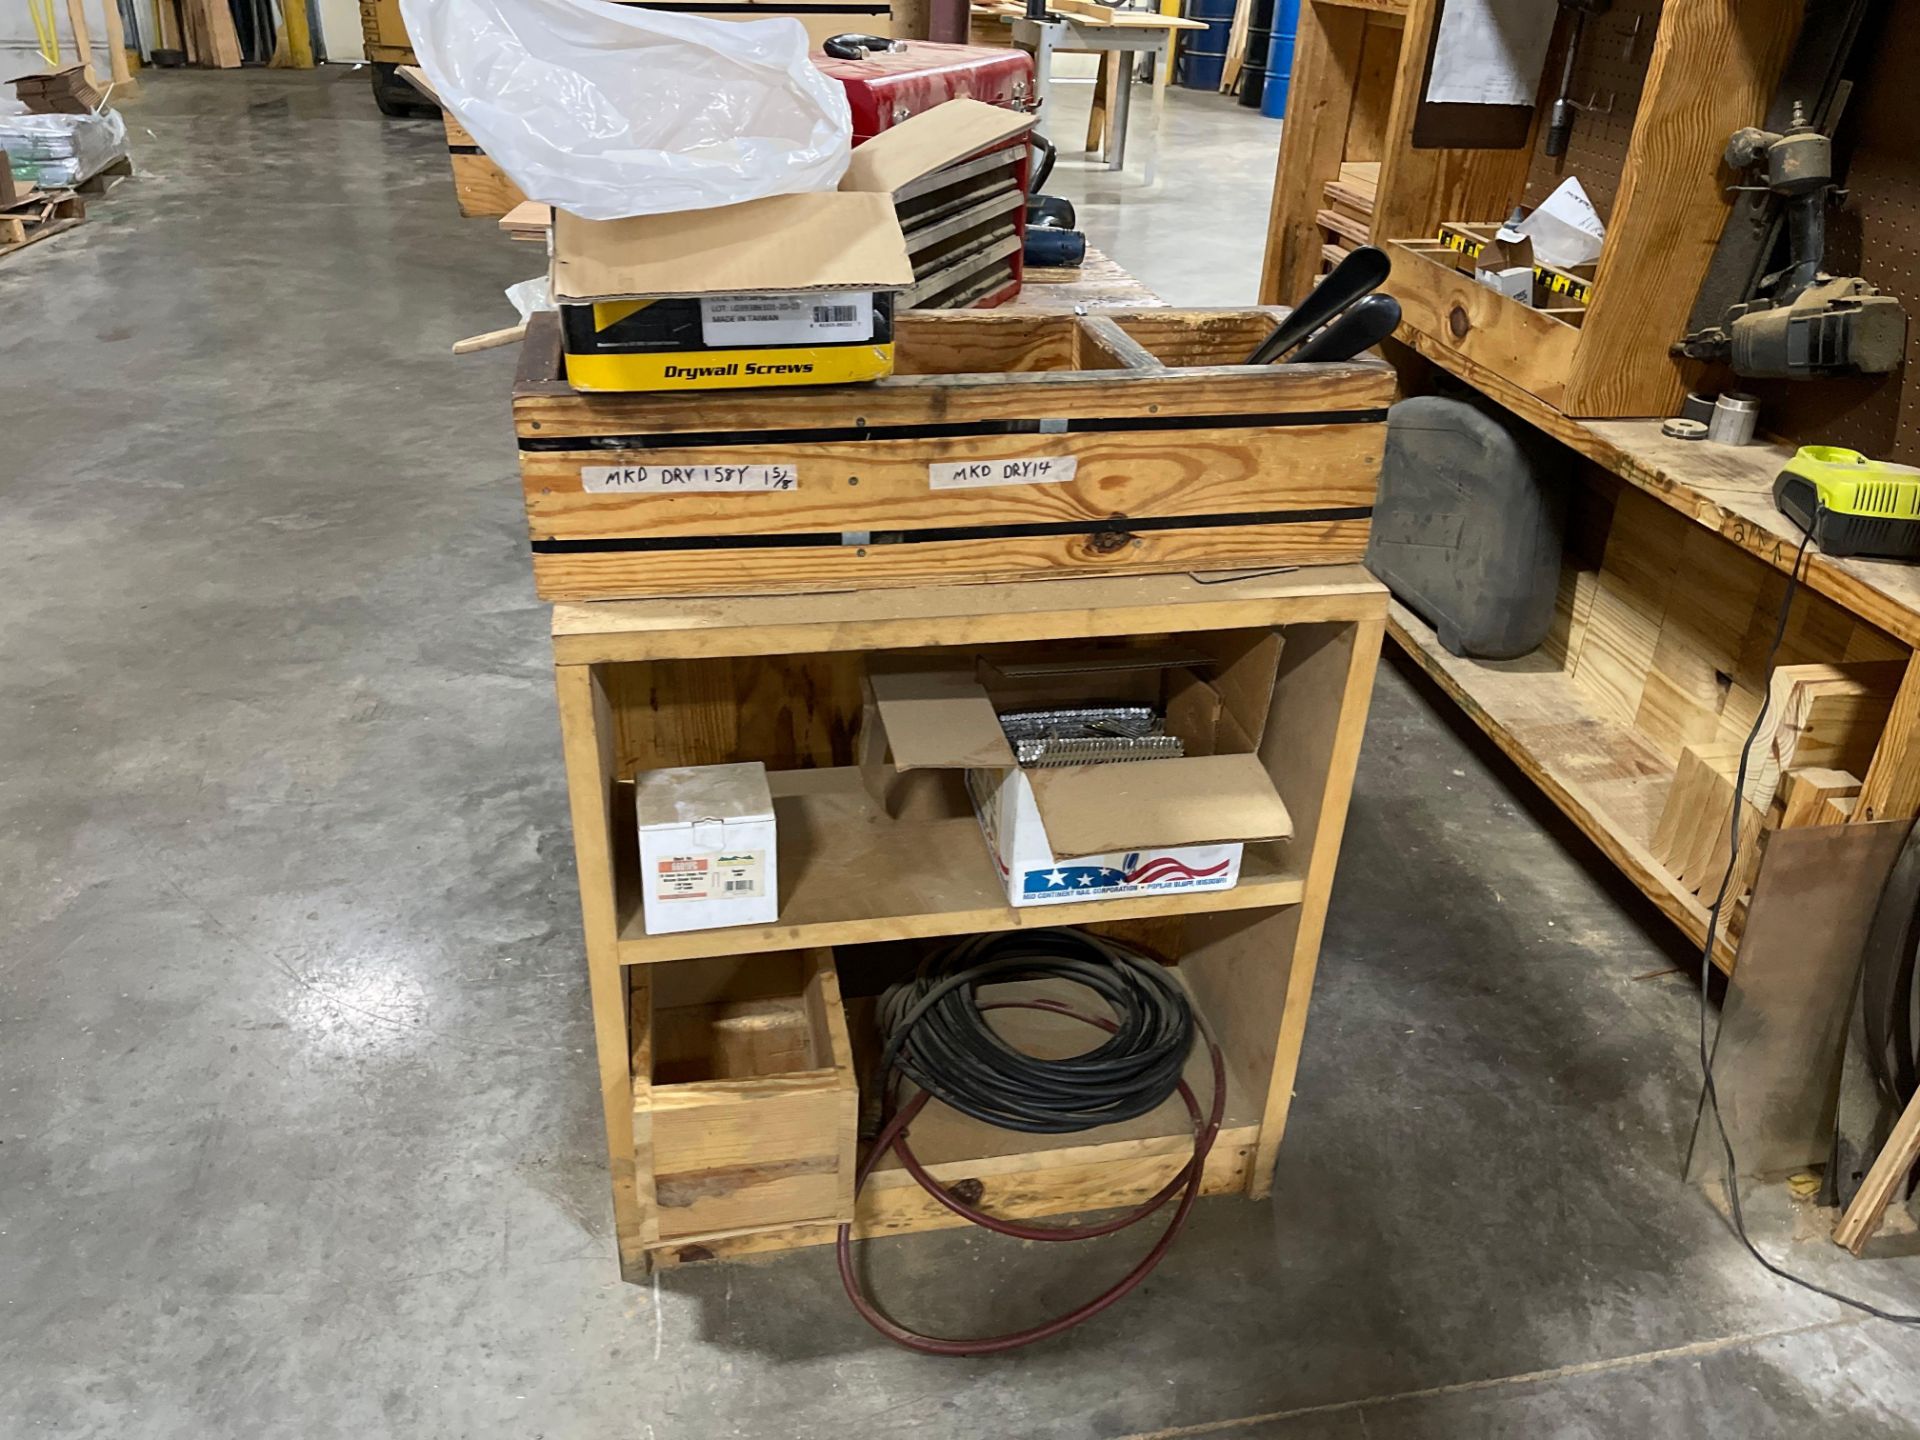 Wood Work Bench Strapping Station w/ Strapping Cart, Wood Crate and Contents - Image 2 of 6